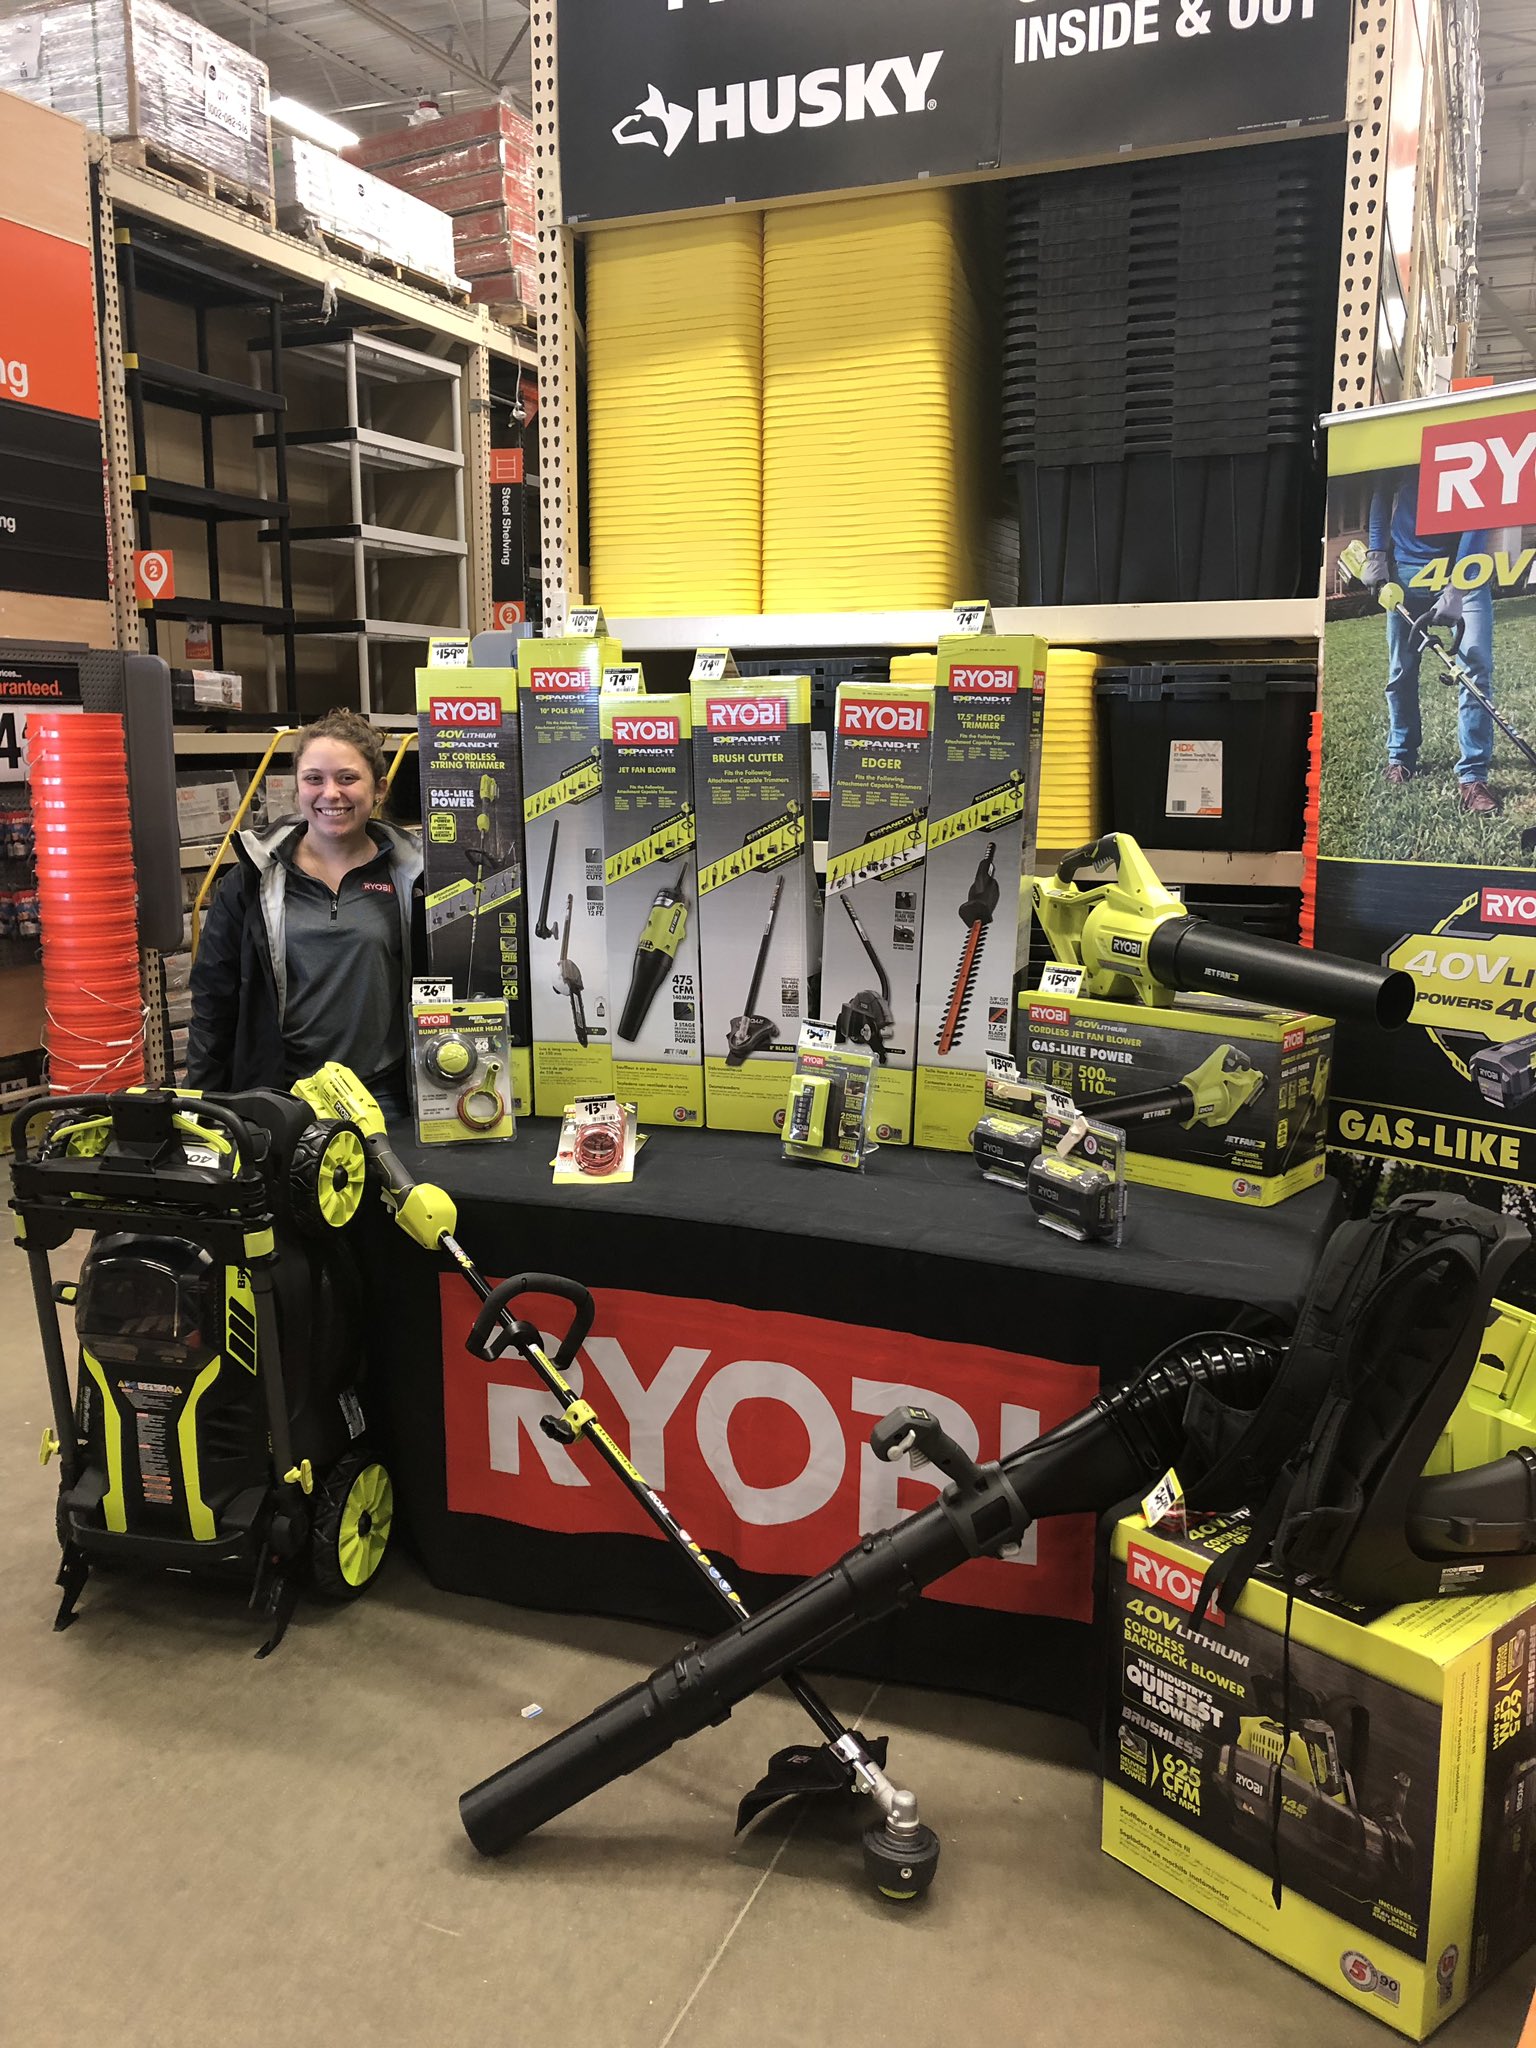 svejsning oversætter positur 6925 on Twitter: "Come on down to Shorewood and meet Thayer our Ryobi rep  and get a demonstration on some great tools for the yard #ryobi  https://t.co/iHY7nyYwqt" / Twitter